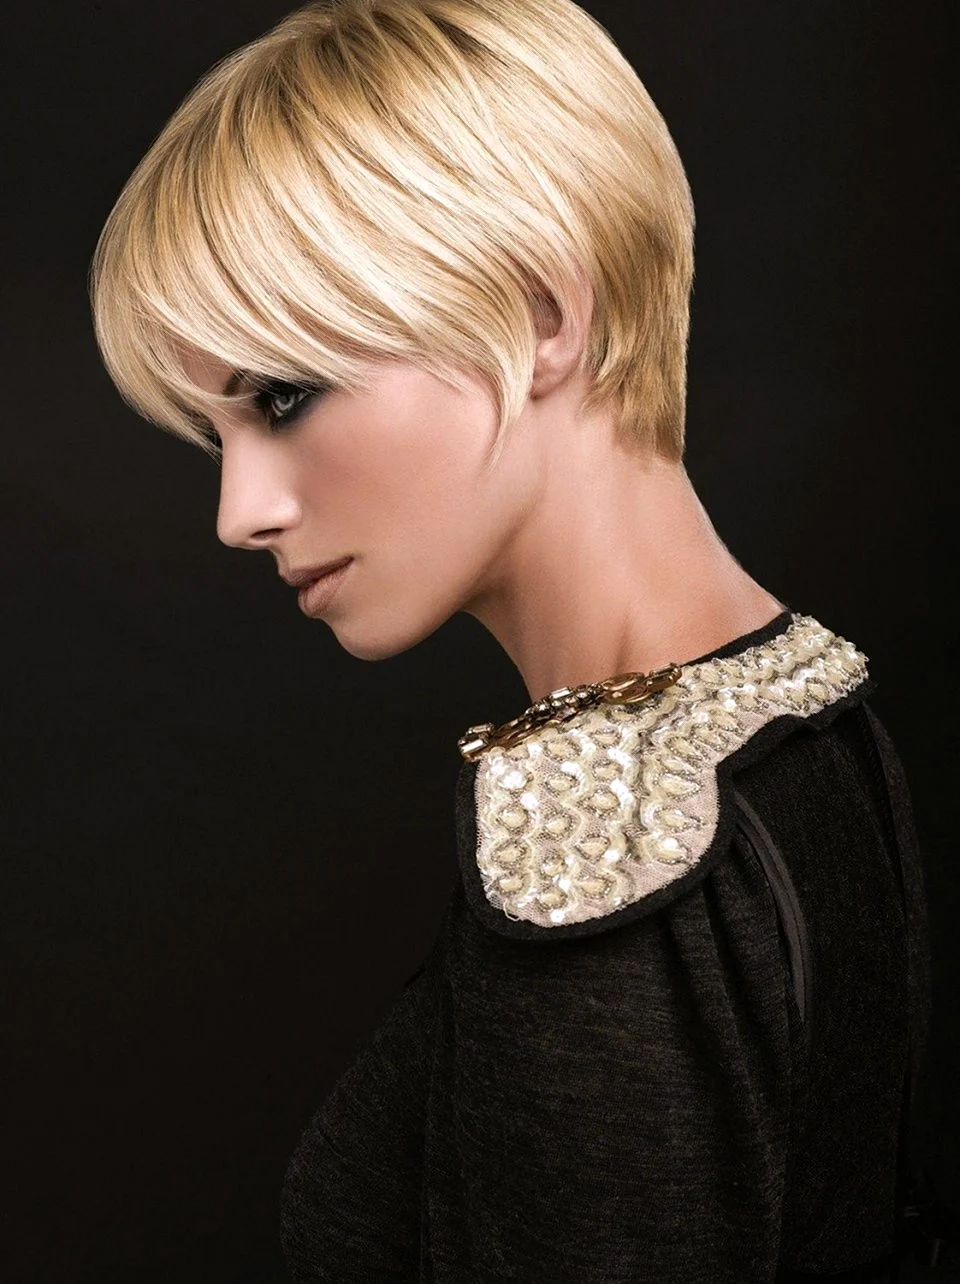 Woman short Hairstyle